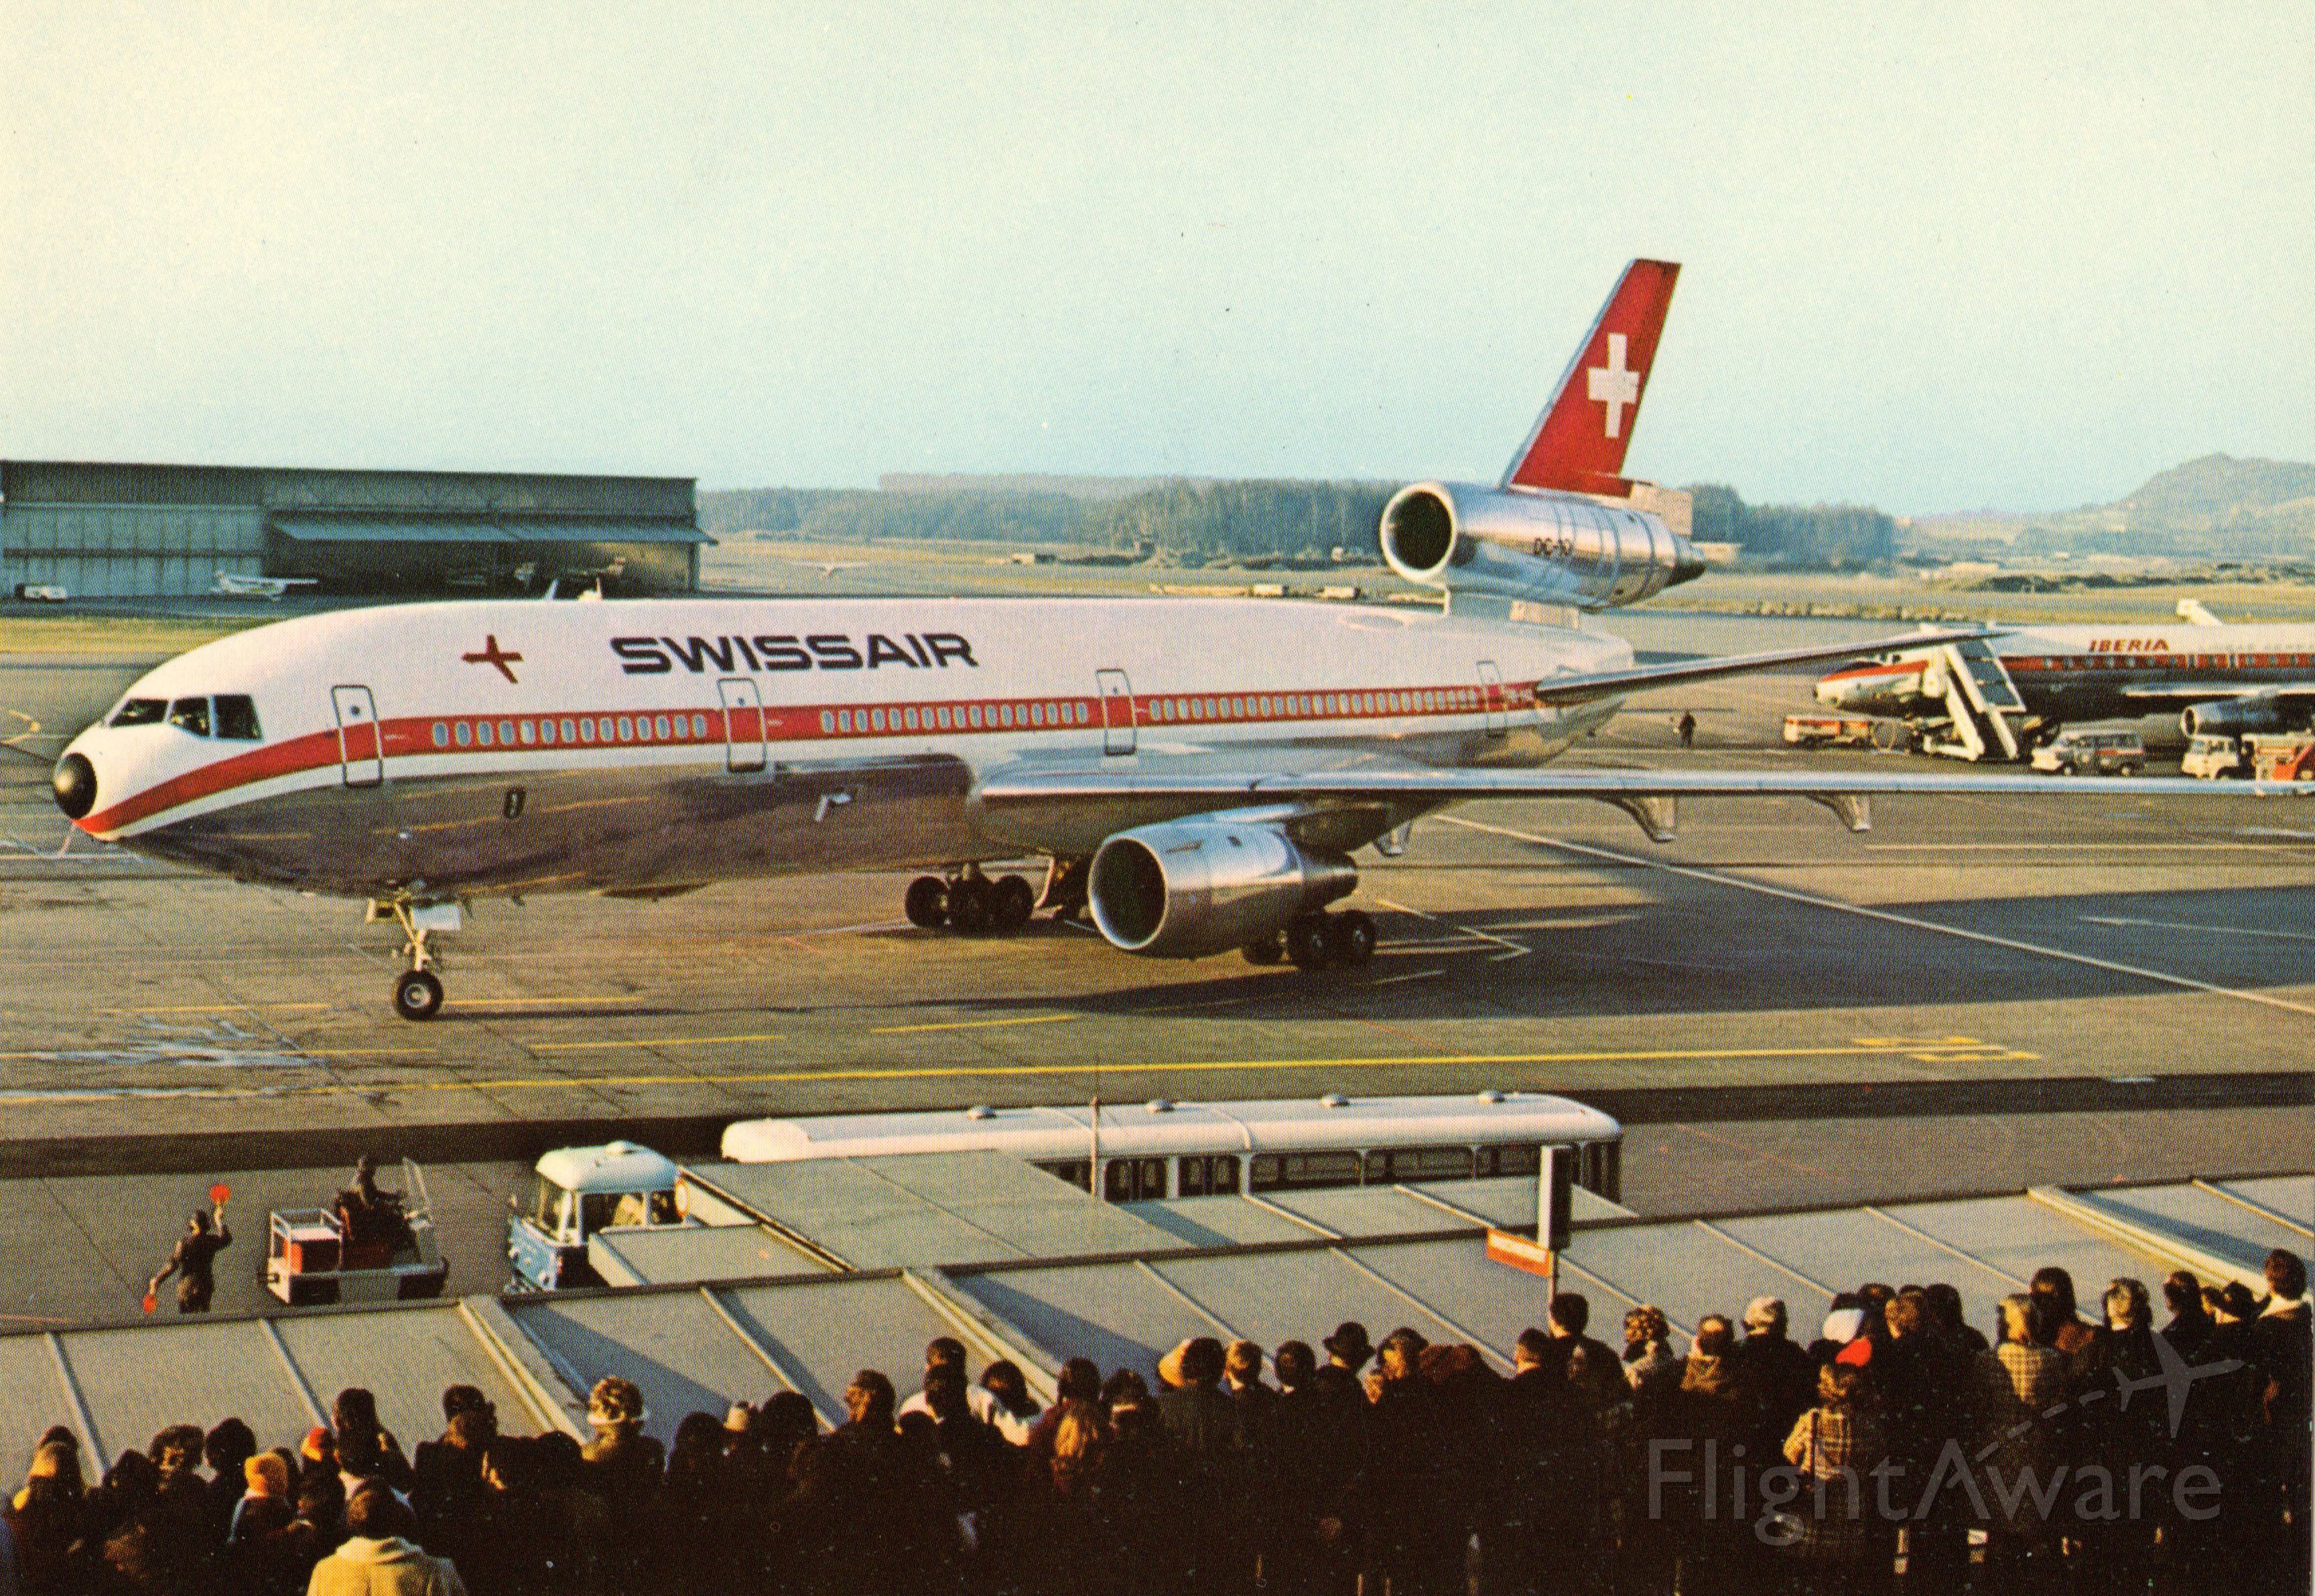 McDonnell Douglas DC-10 (HB-IHA) - This is a postcard I purchased back in the early 1970's. I did not photograph this image! It depicts a McDonnell Douglas DC-10-30 arriving with folks viewing the aircraft above the arrival gate. Also in the scene is a partial front part of the national airlines of Spain, Iberia. A commenter has noted that Iberia is a DC-8-52. br /Cielo despejado para nuestros miembros espanoles.